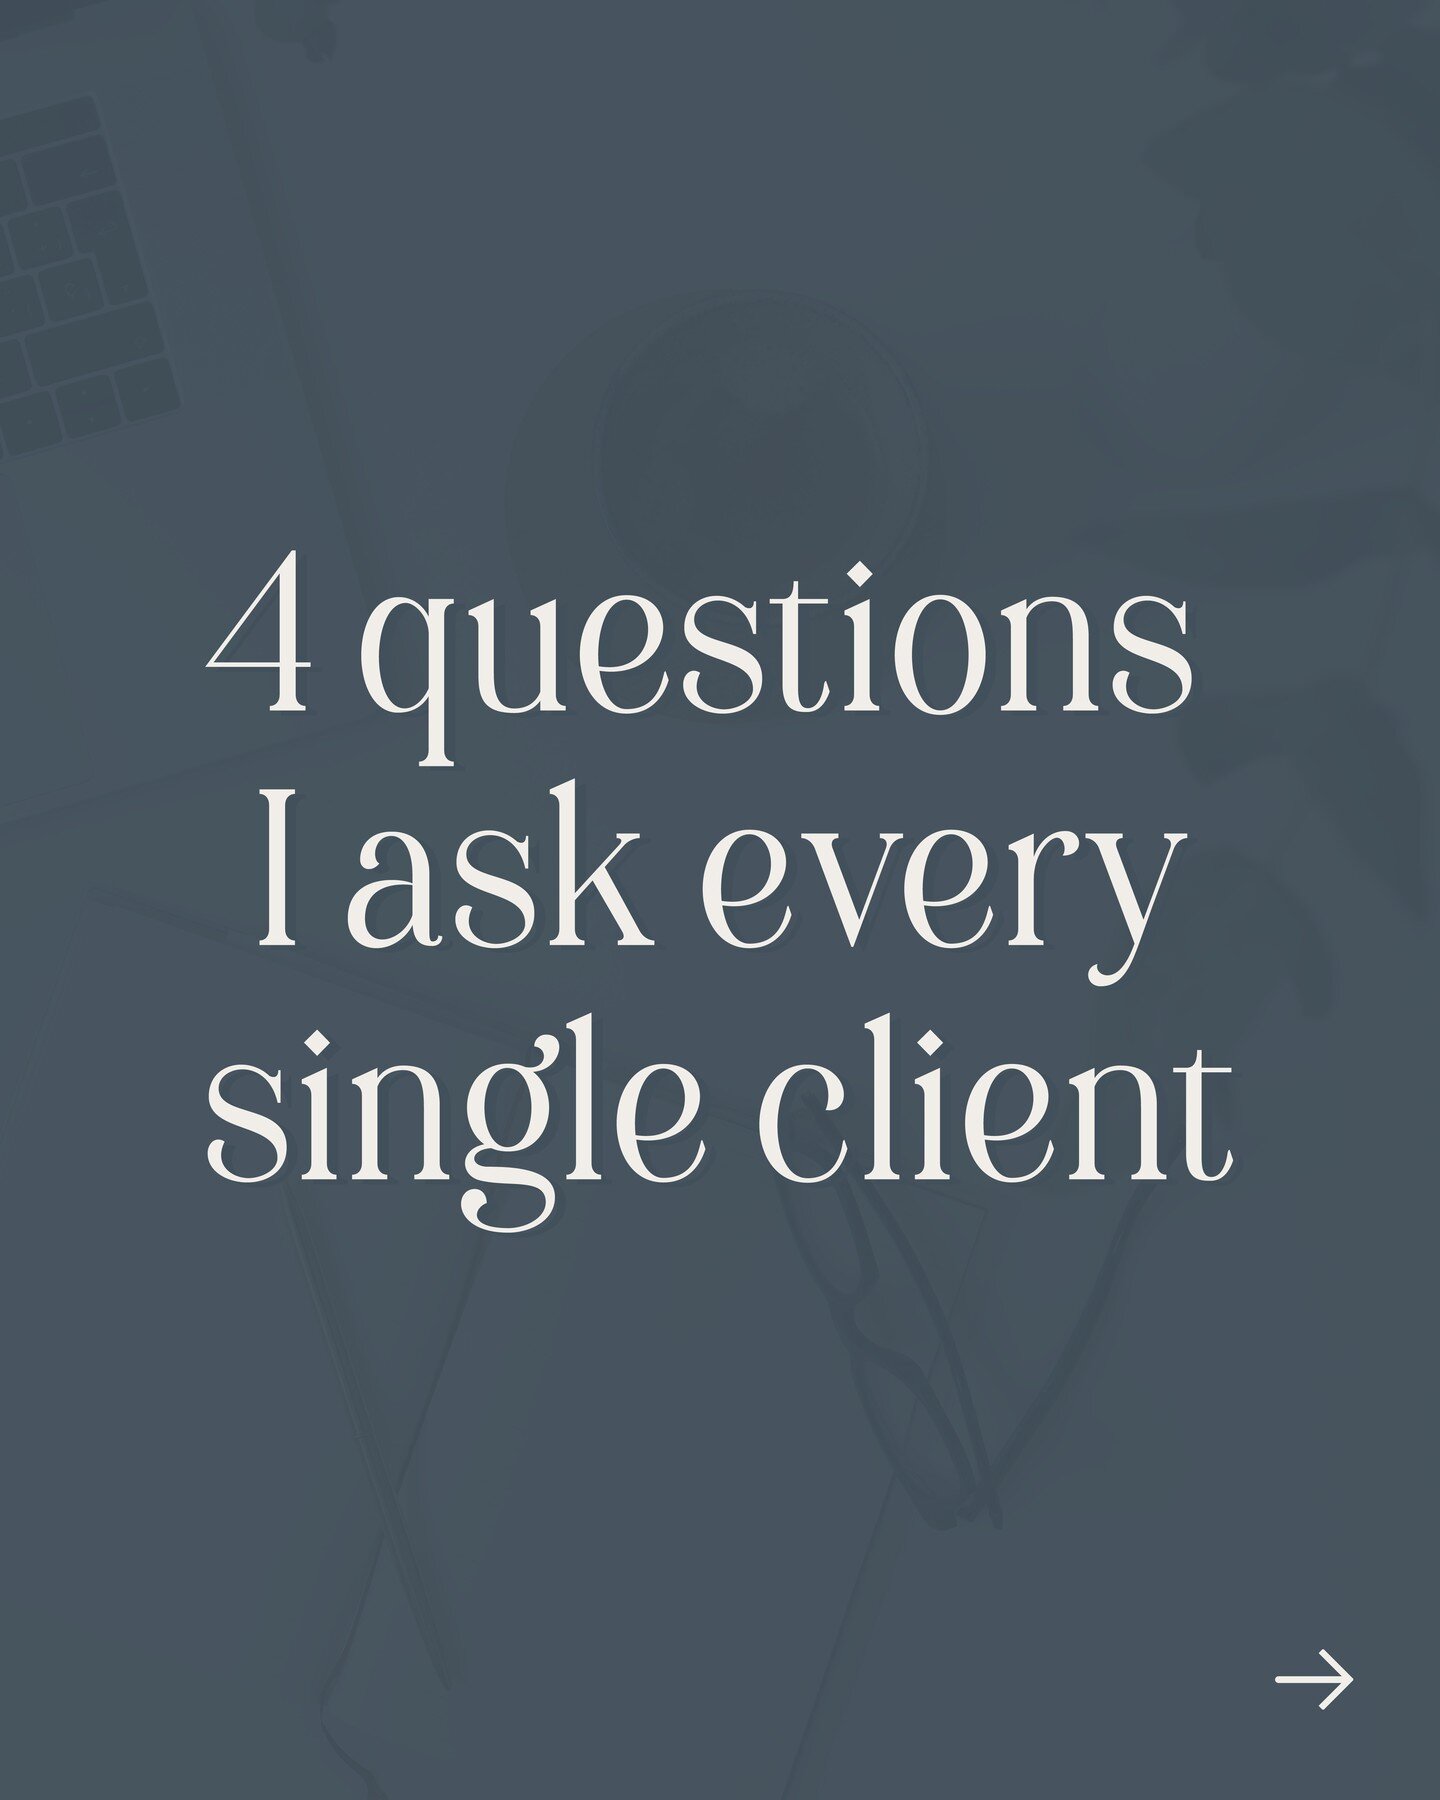 I ask EVERY SINGLE CLIENT that I work with these 4 questions...

1. Who are you?
2. What do you do?
3. Why do you do it?
4. Who are you doing it for?

The work that I do with each client is very intimate. I am helping them build and develop something